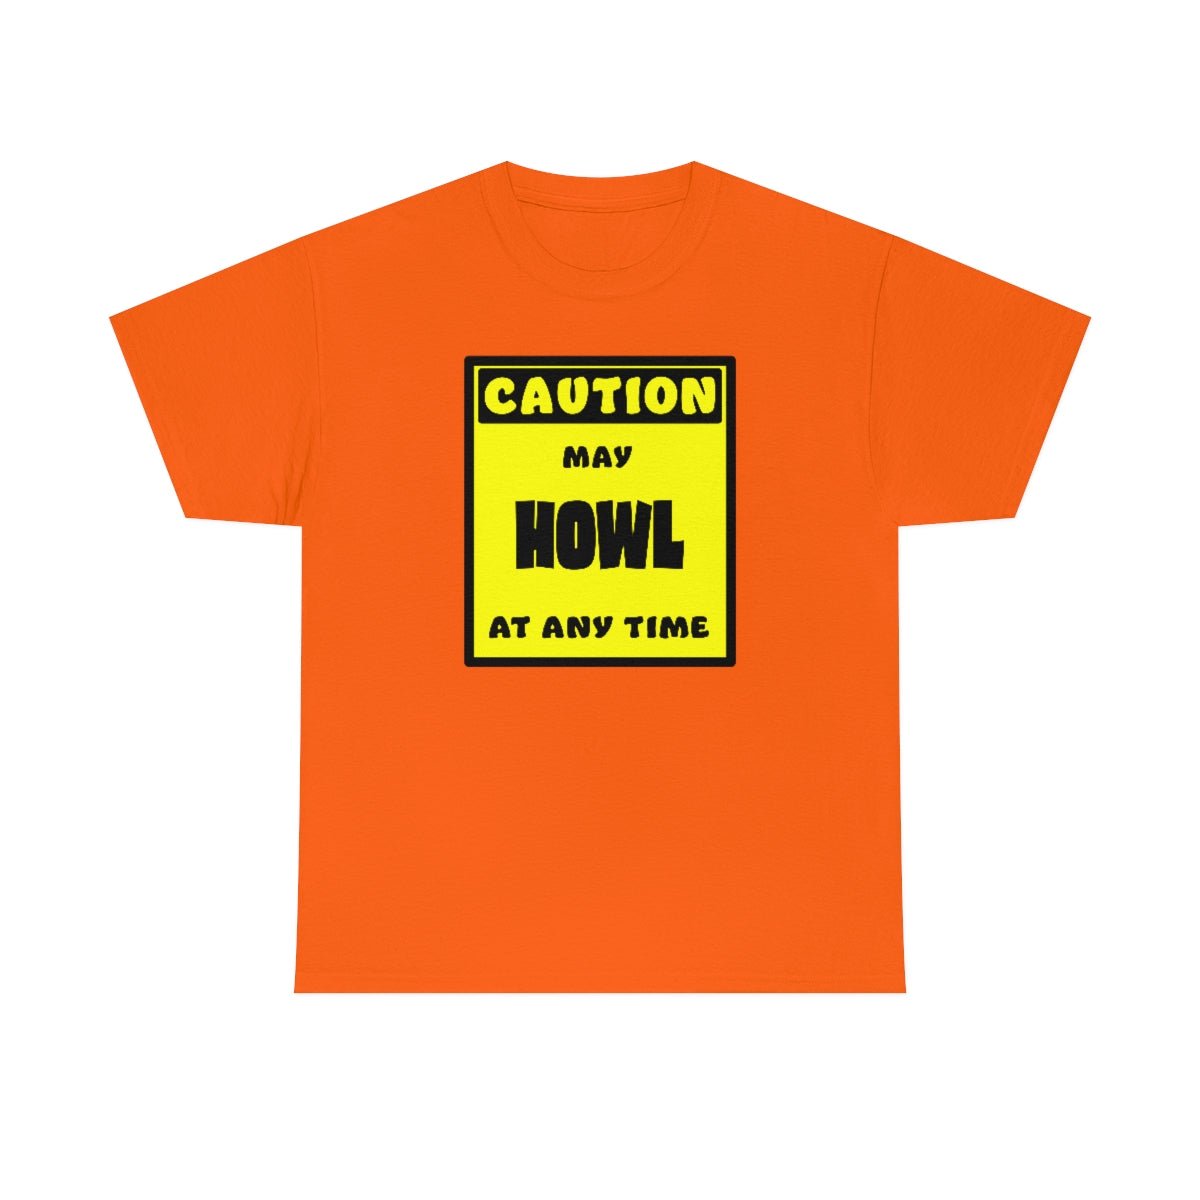 CAUTION! May HOWL at any time! - T-Shirt T-Shirt AFLT-Whootorca Orange S 